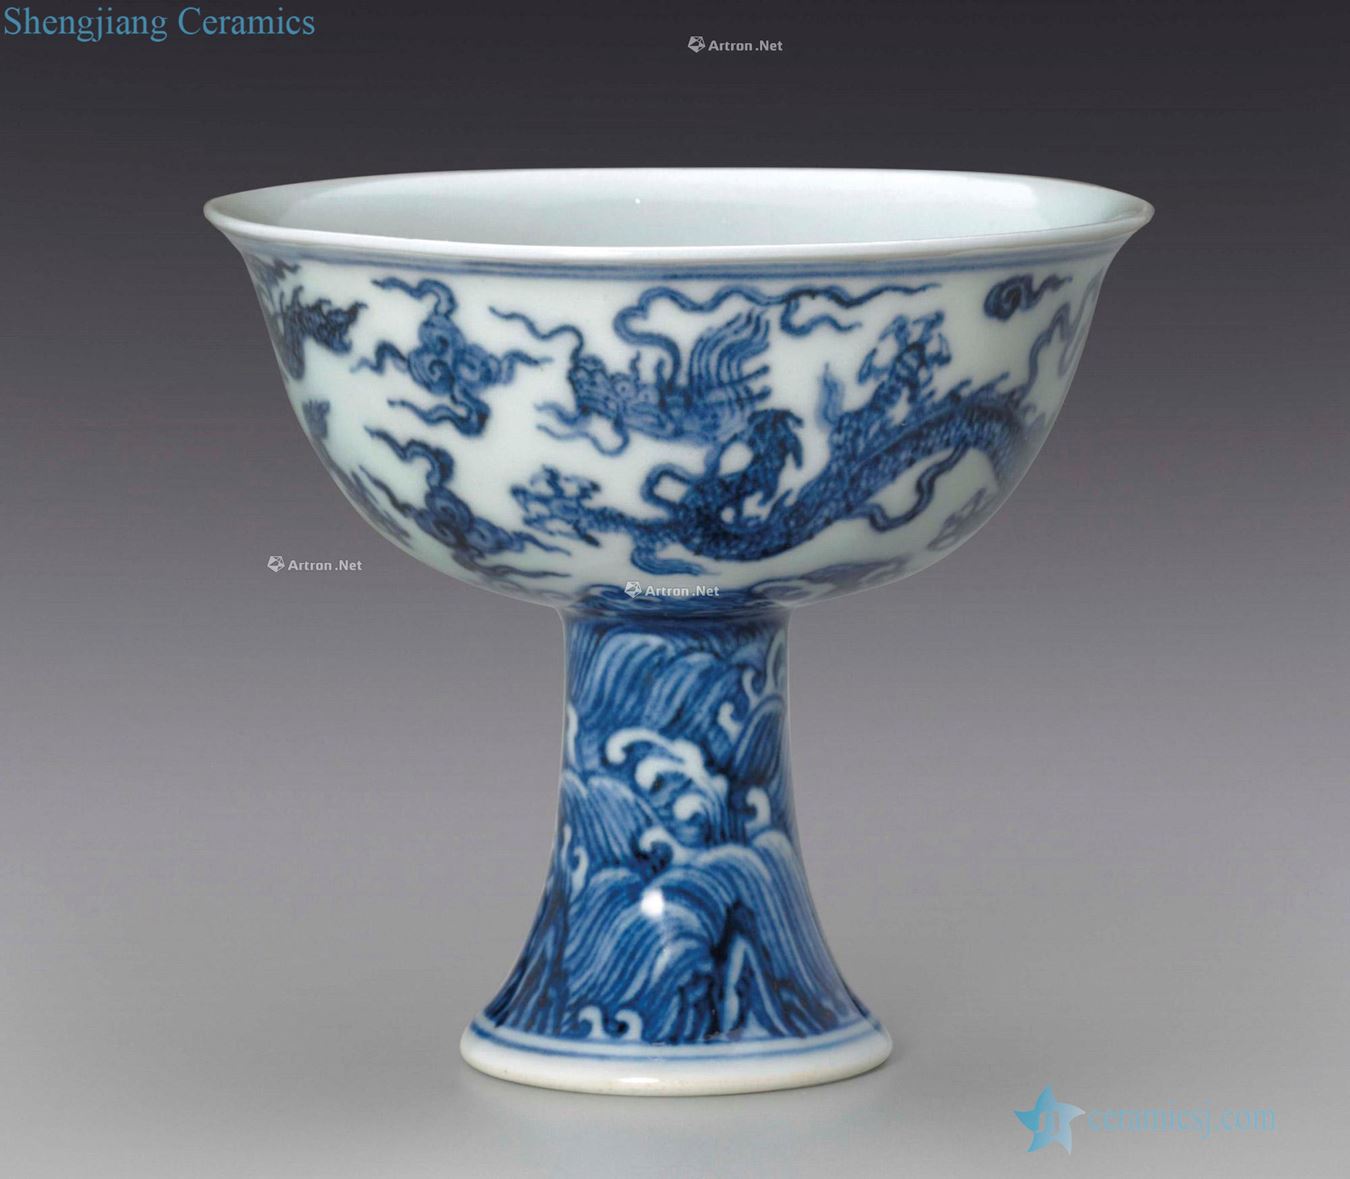 KANGXI AND YONGZHENG PERIOD (1662 ~ 1662) is A VERY RARE MING - STYLE BLUE AND WHITE "DRAGON" STEM CUP